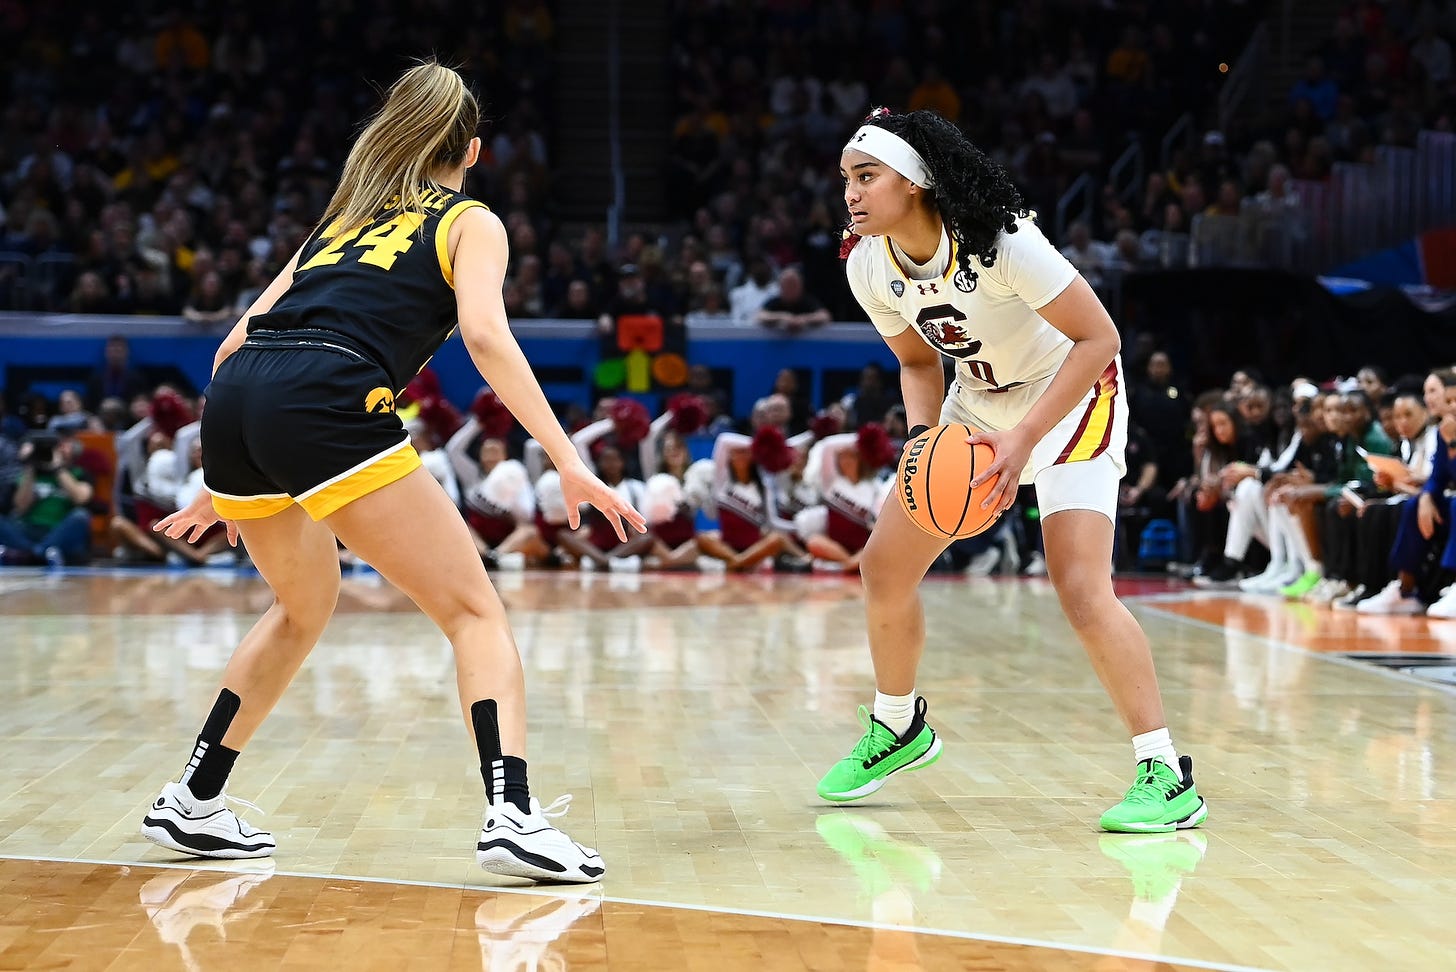 Te-Hina Paopao, right, of South Carolina is guarded by an Iowa defender during the women’s national championship game on Sunday in Cleveland. Paopao hit three 3-pointers to help lead the Gamecocks to the title and an undefeated season. Photo credit South Carolina Athletics